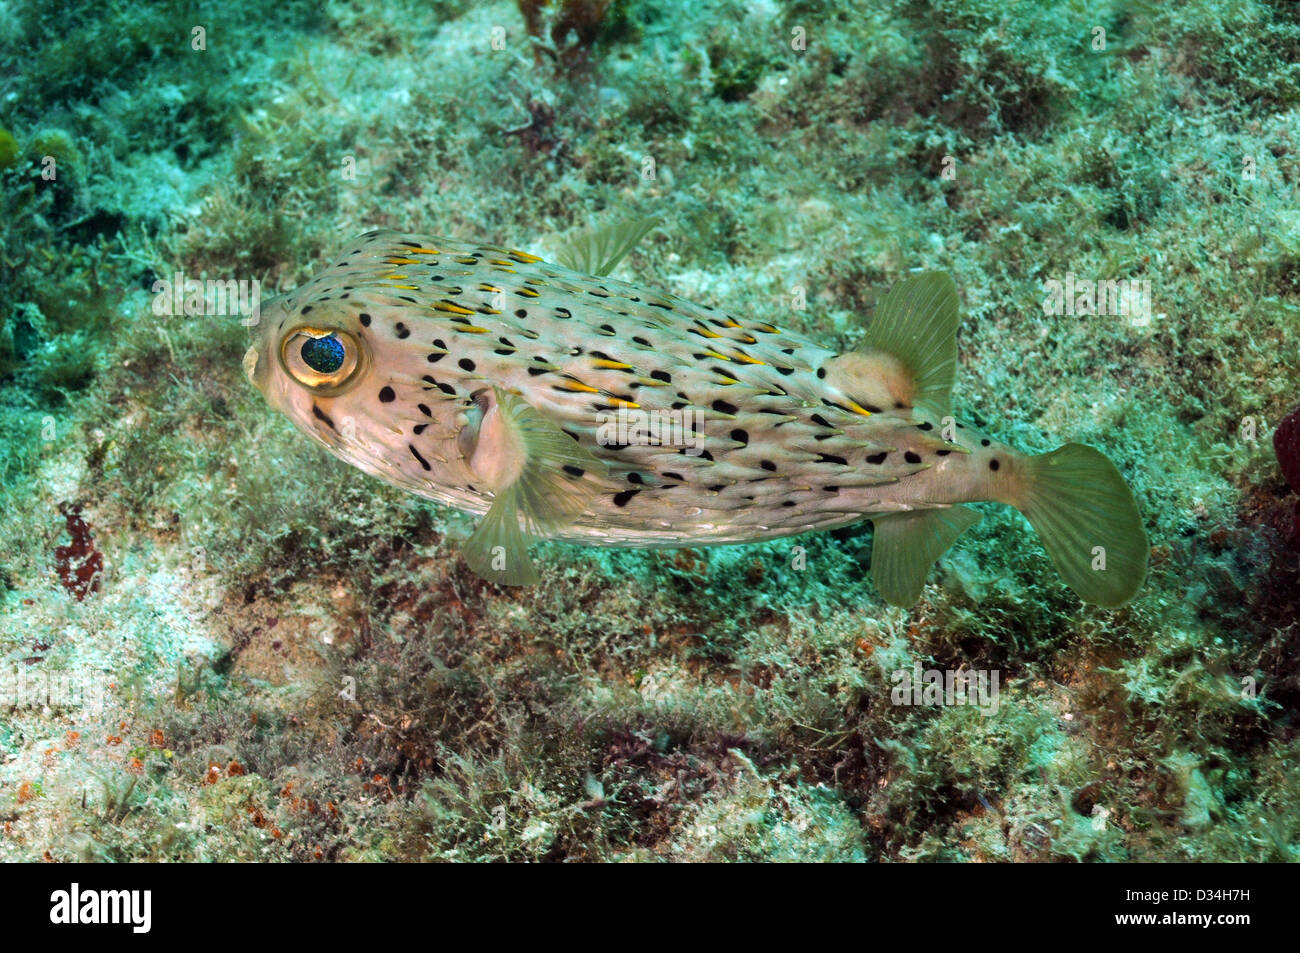 Blowfish or spiny porcupine fish underwater in ocean Stock Photo